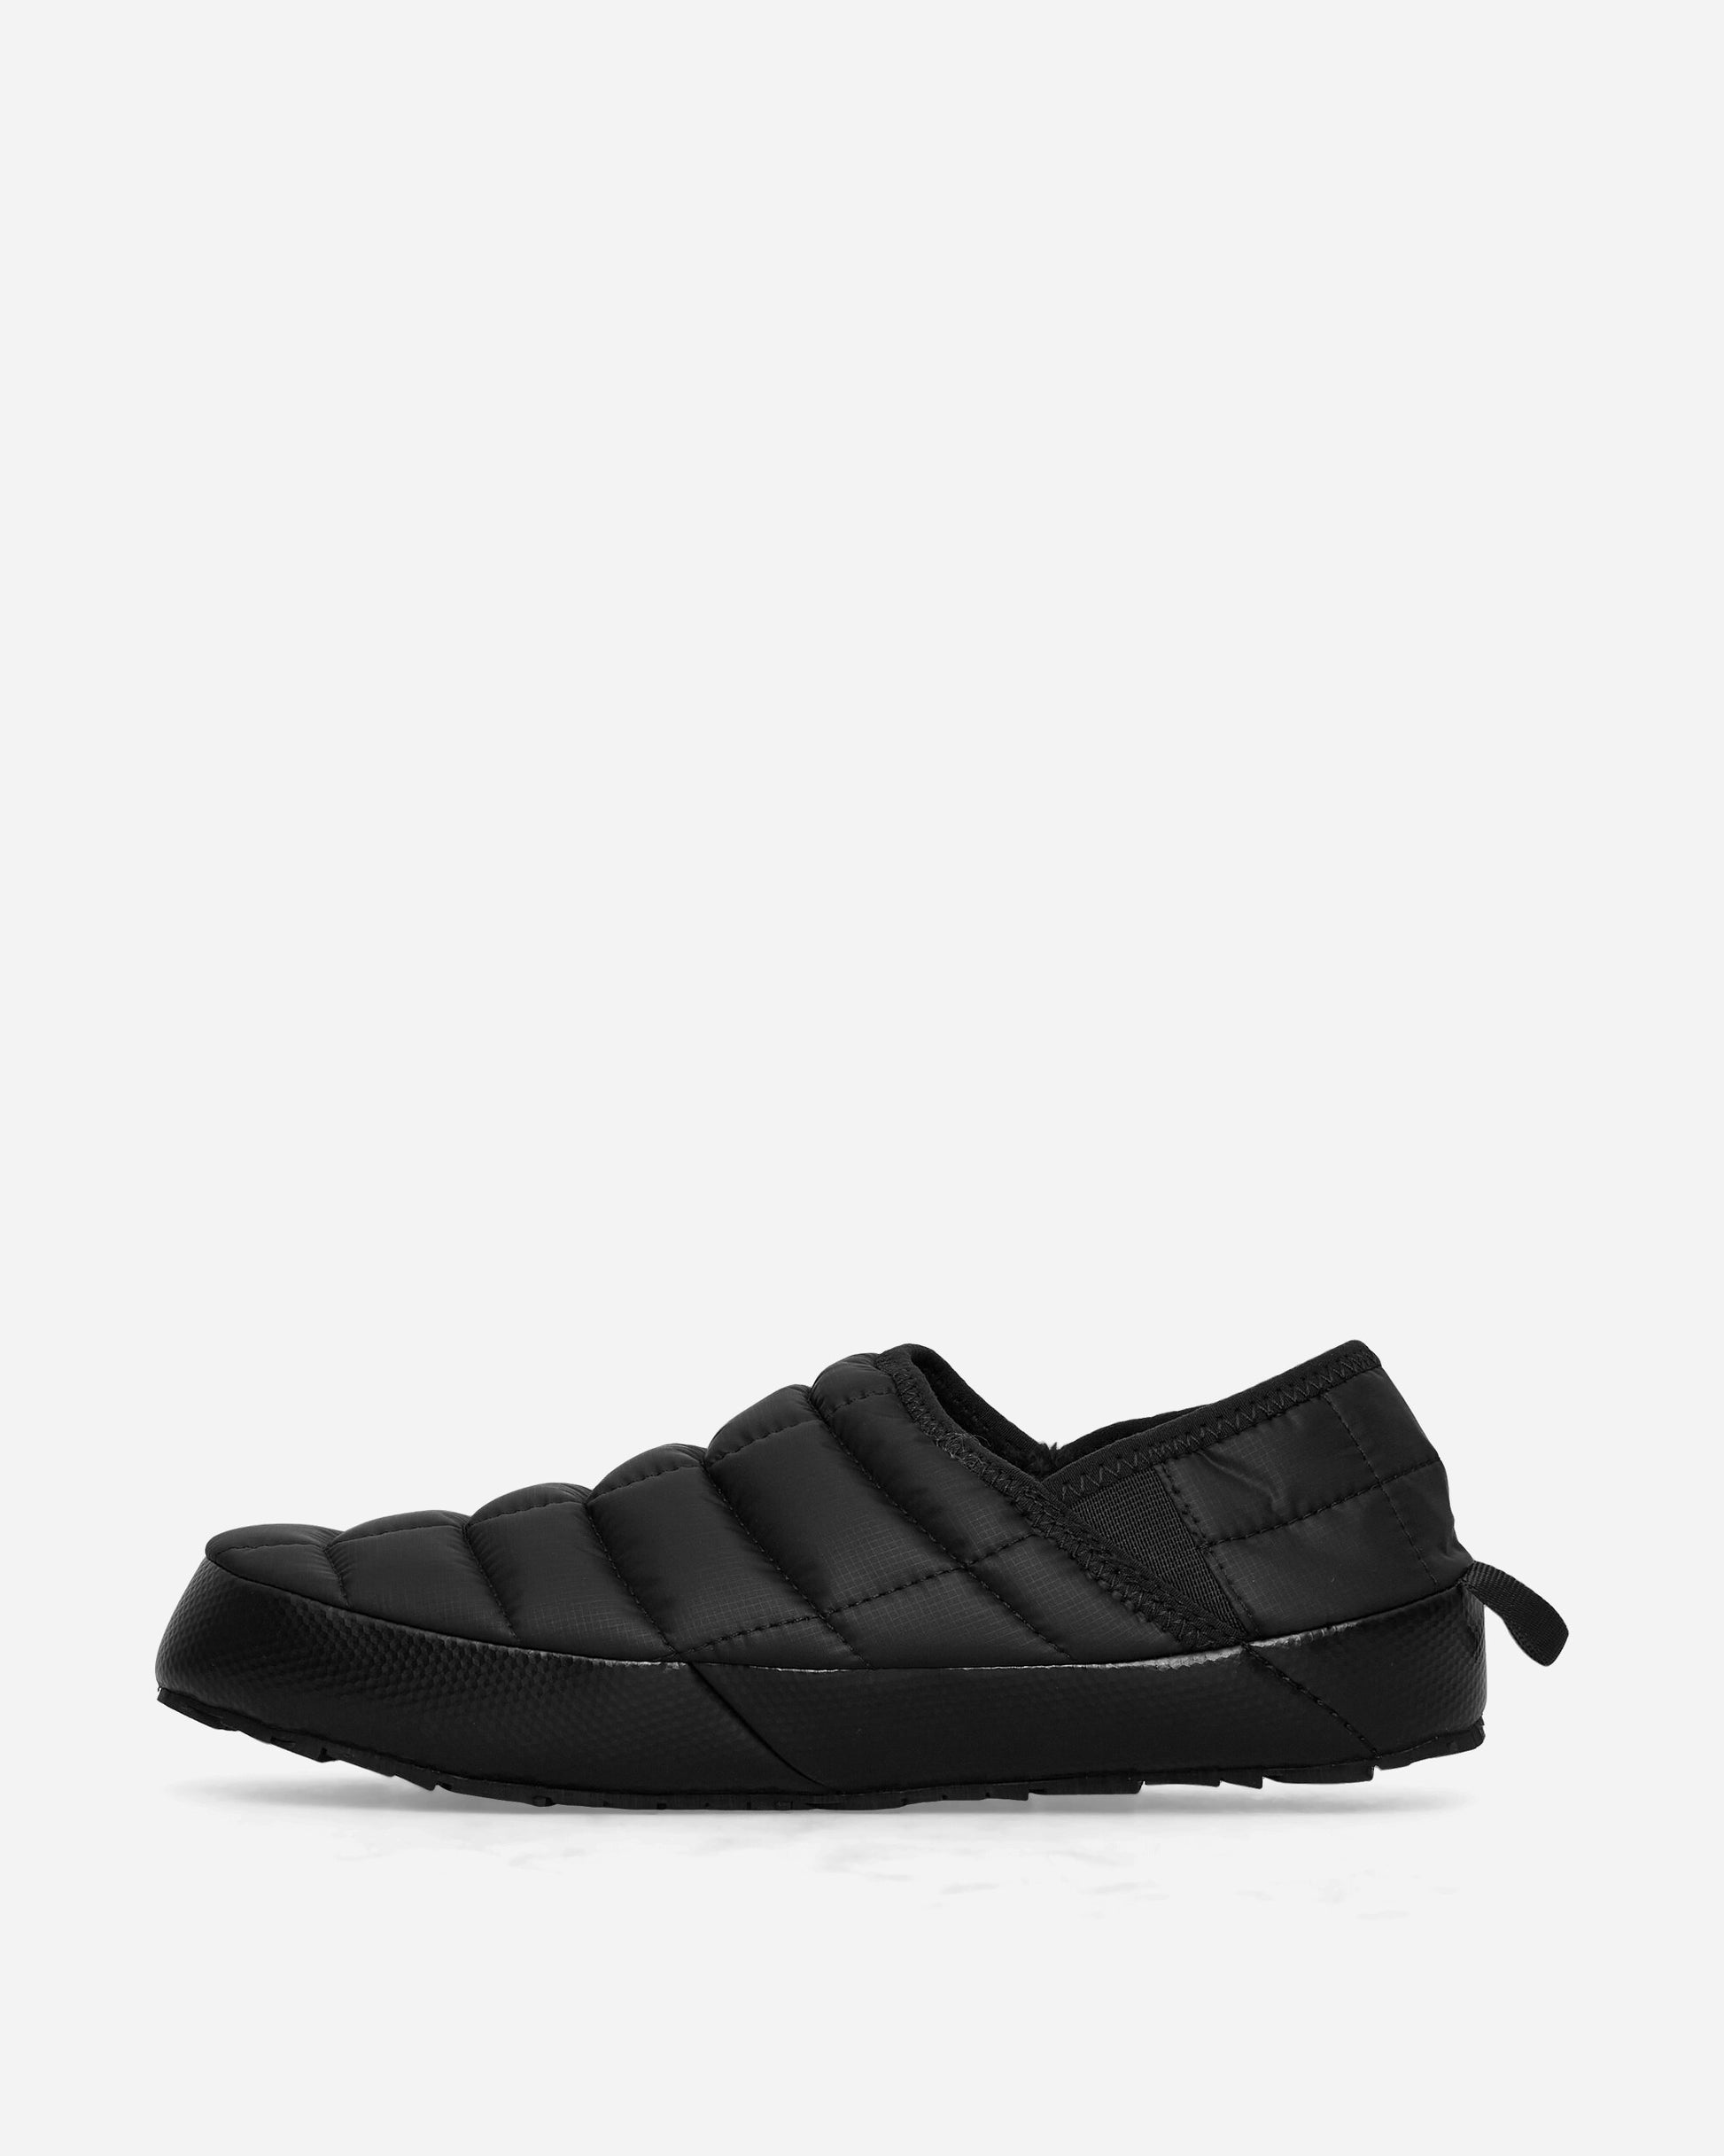 The North Face Wmns Women’S Thermoballtm Traction Mule V Tnf Black/Tnf Black Sandals and Slides Sandals and Mules NF0A3V1H KX71 